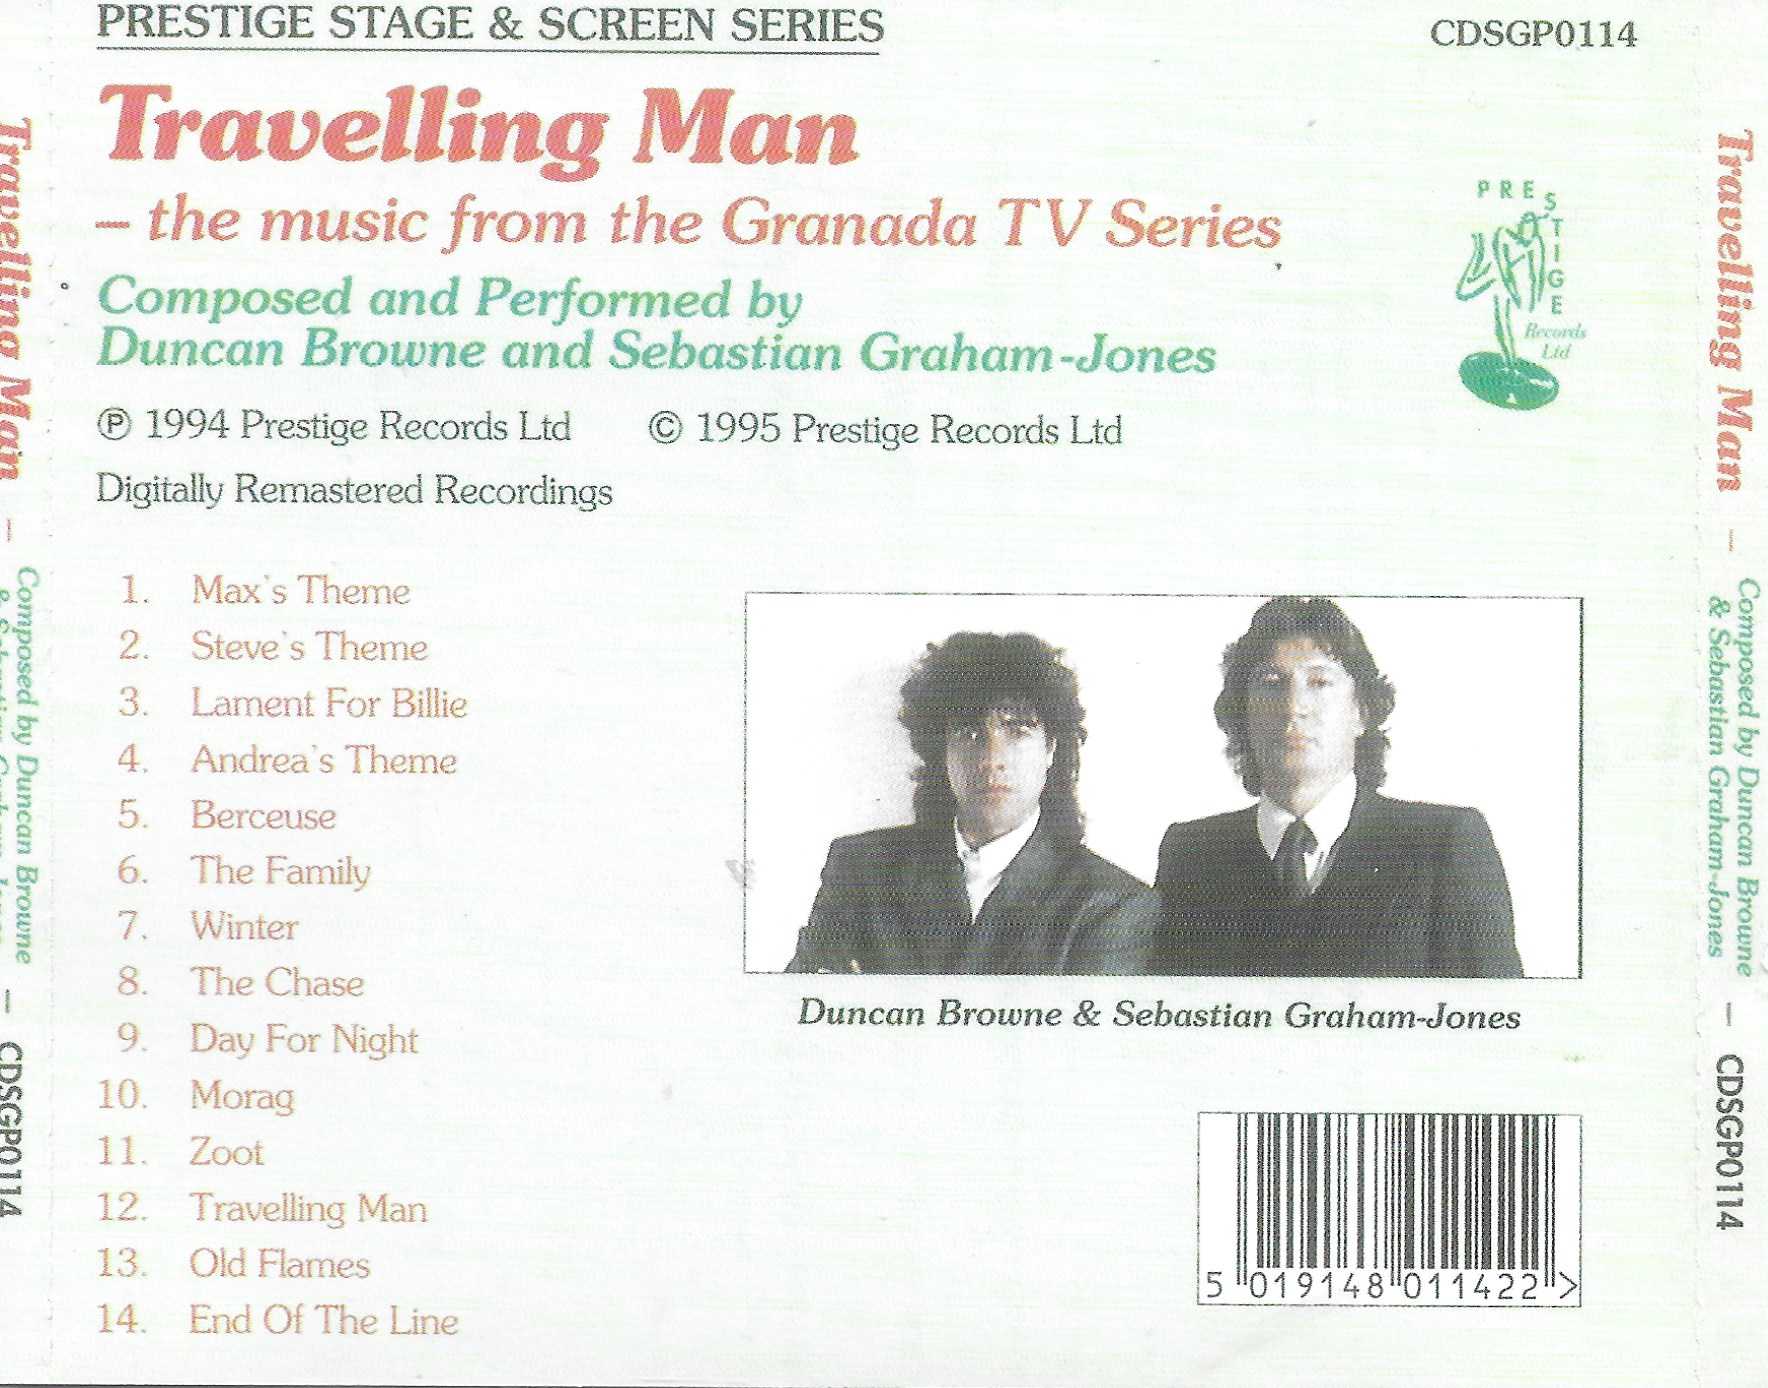 Back cover of CDSGP 0114